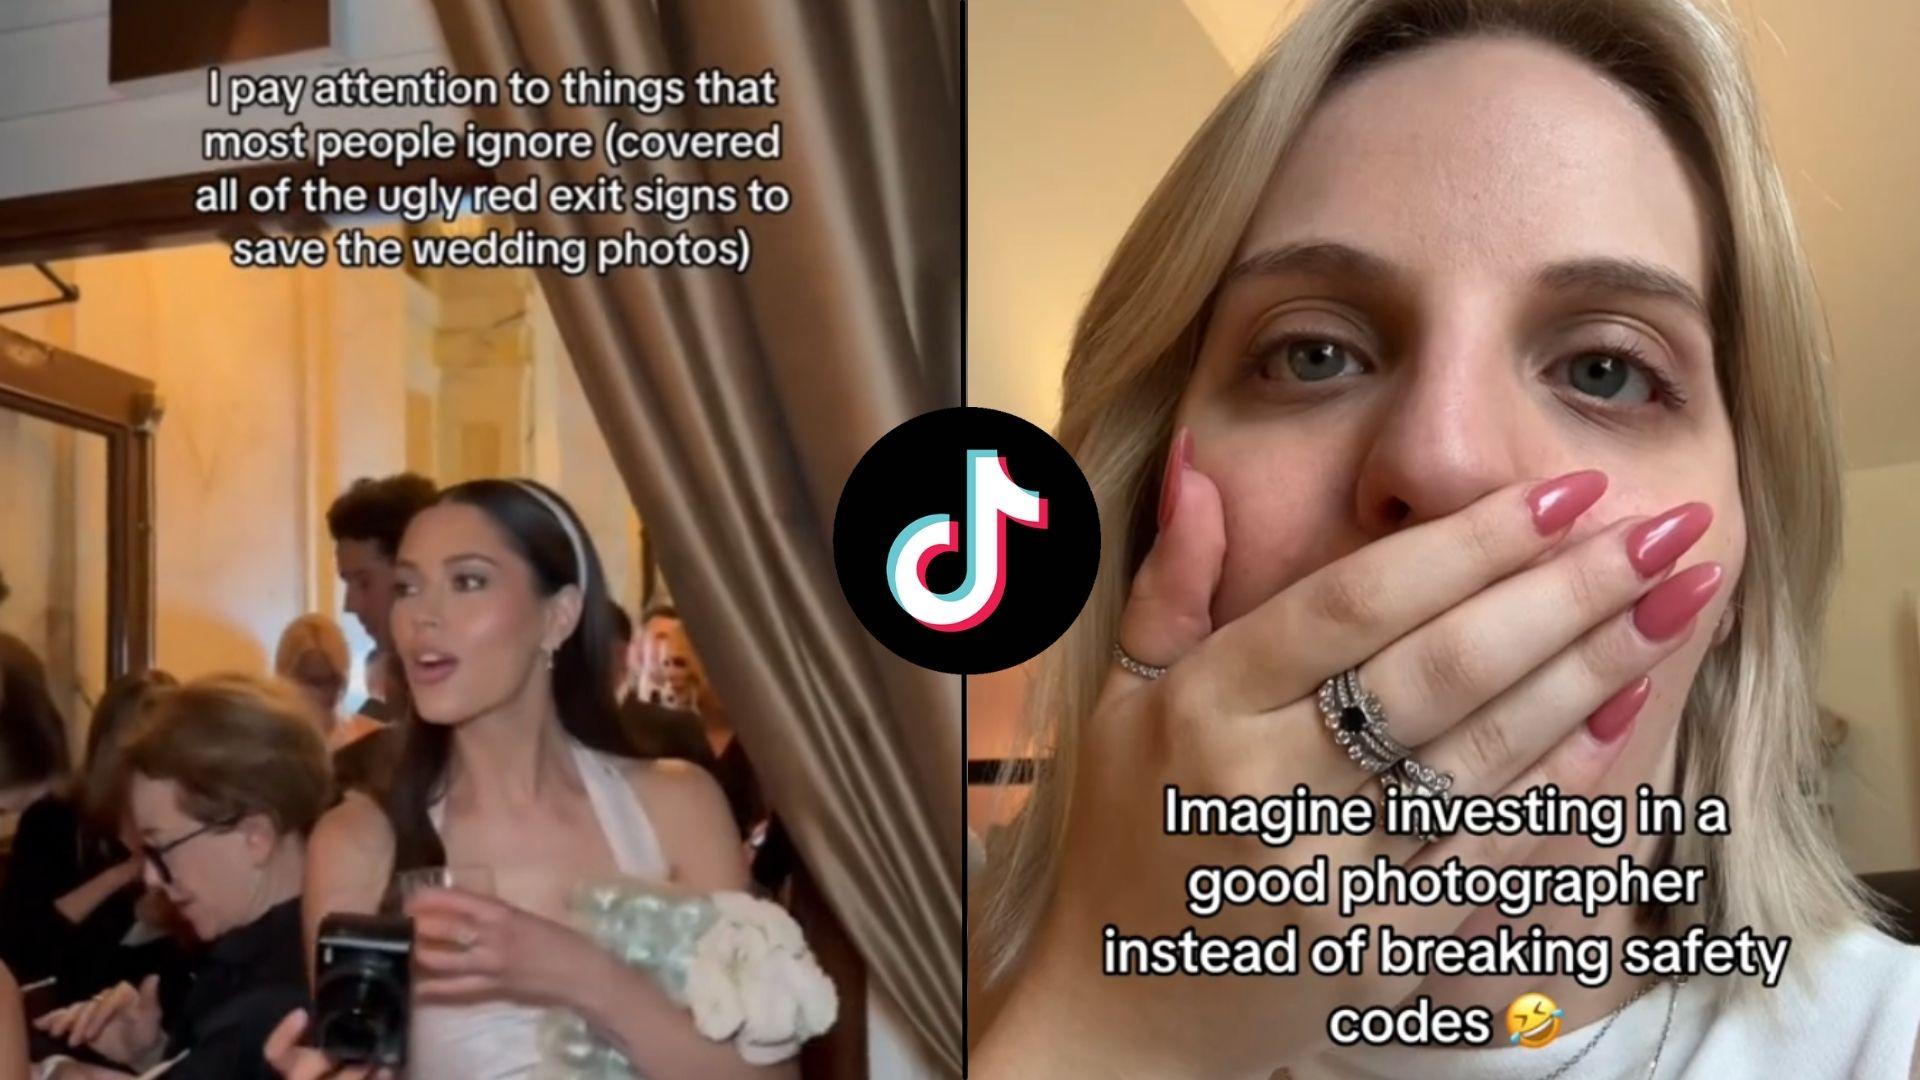 Screenshots of wedding party on TikTok and woman covering face